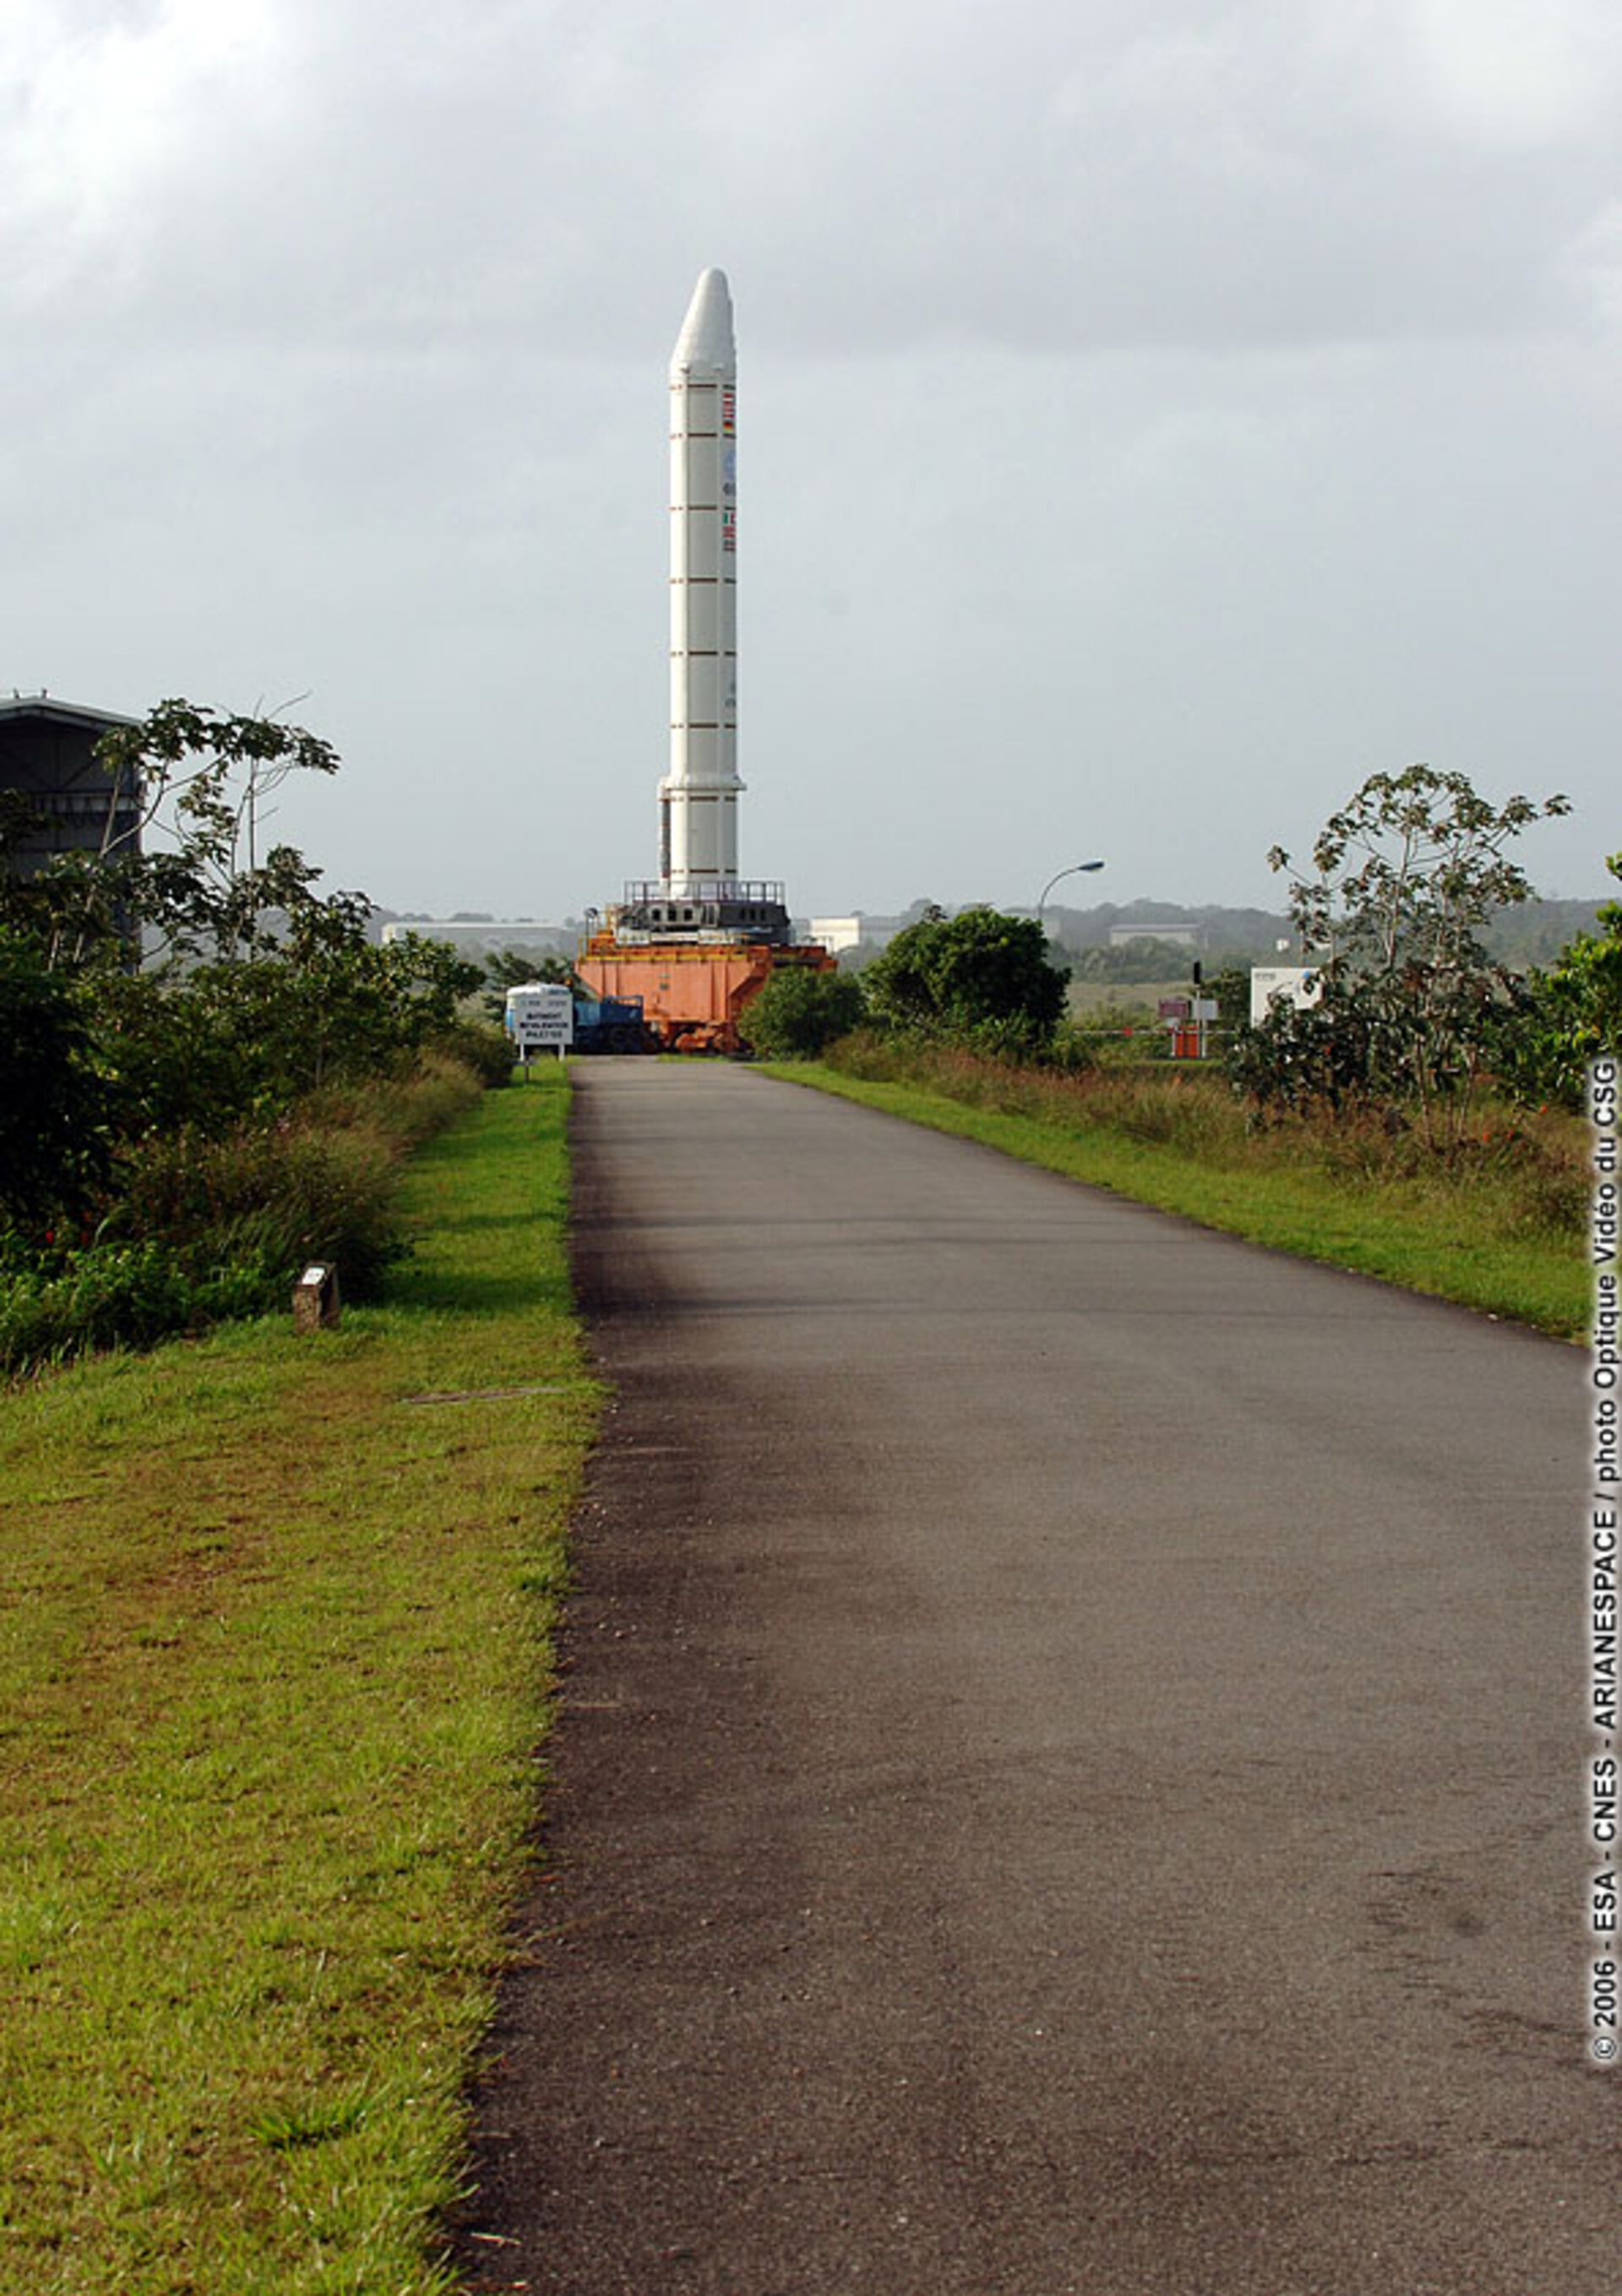 An Ariane 5 Solid Booster Stage, on a transporter, leaves the Booster Storage Building